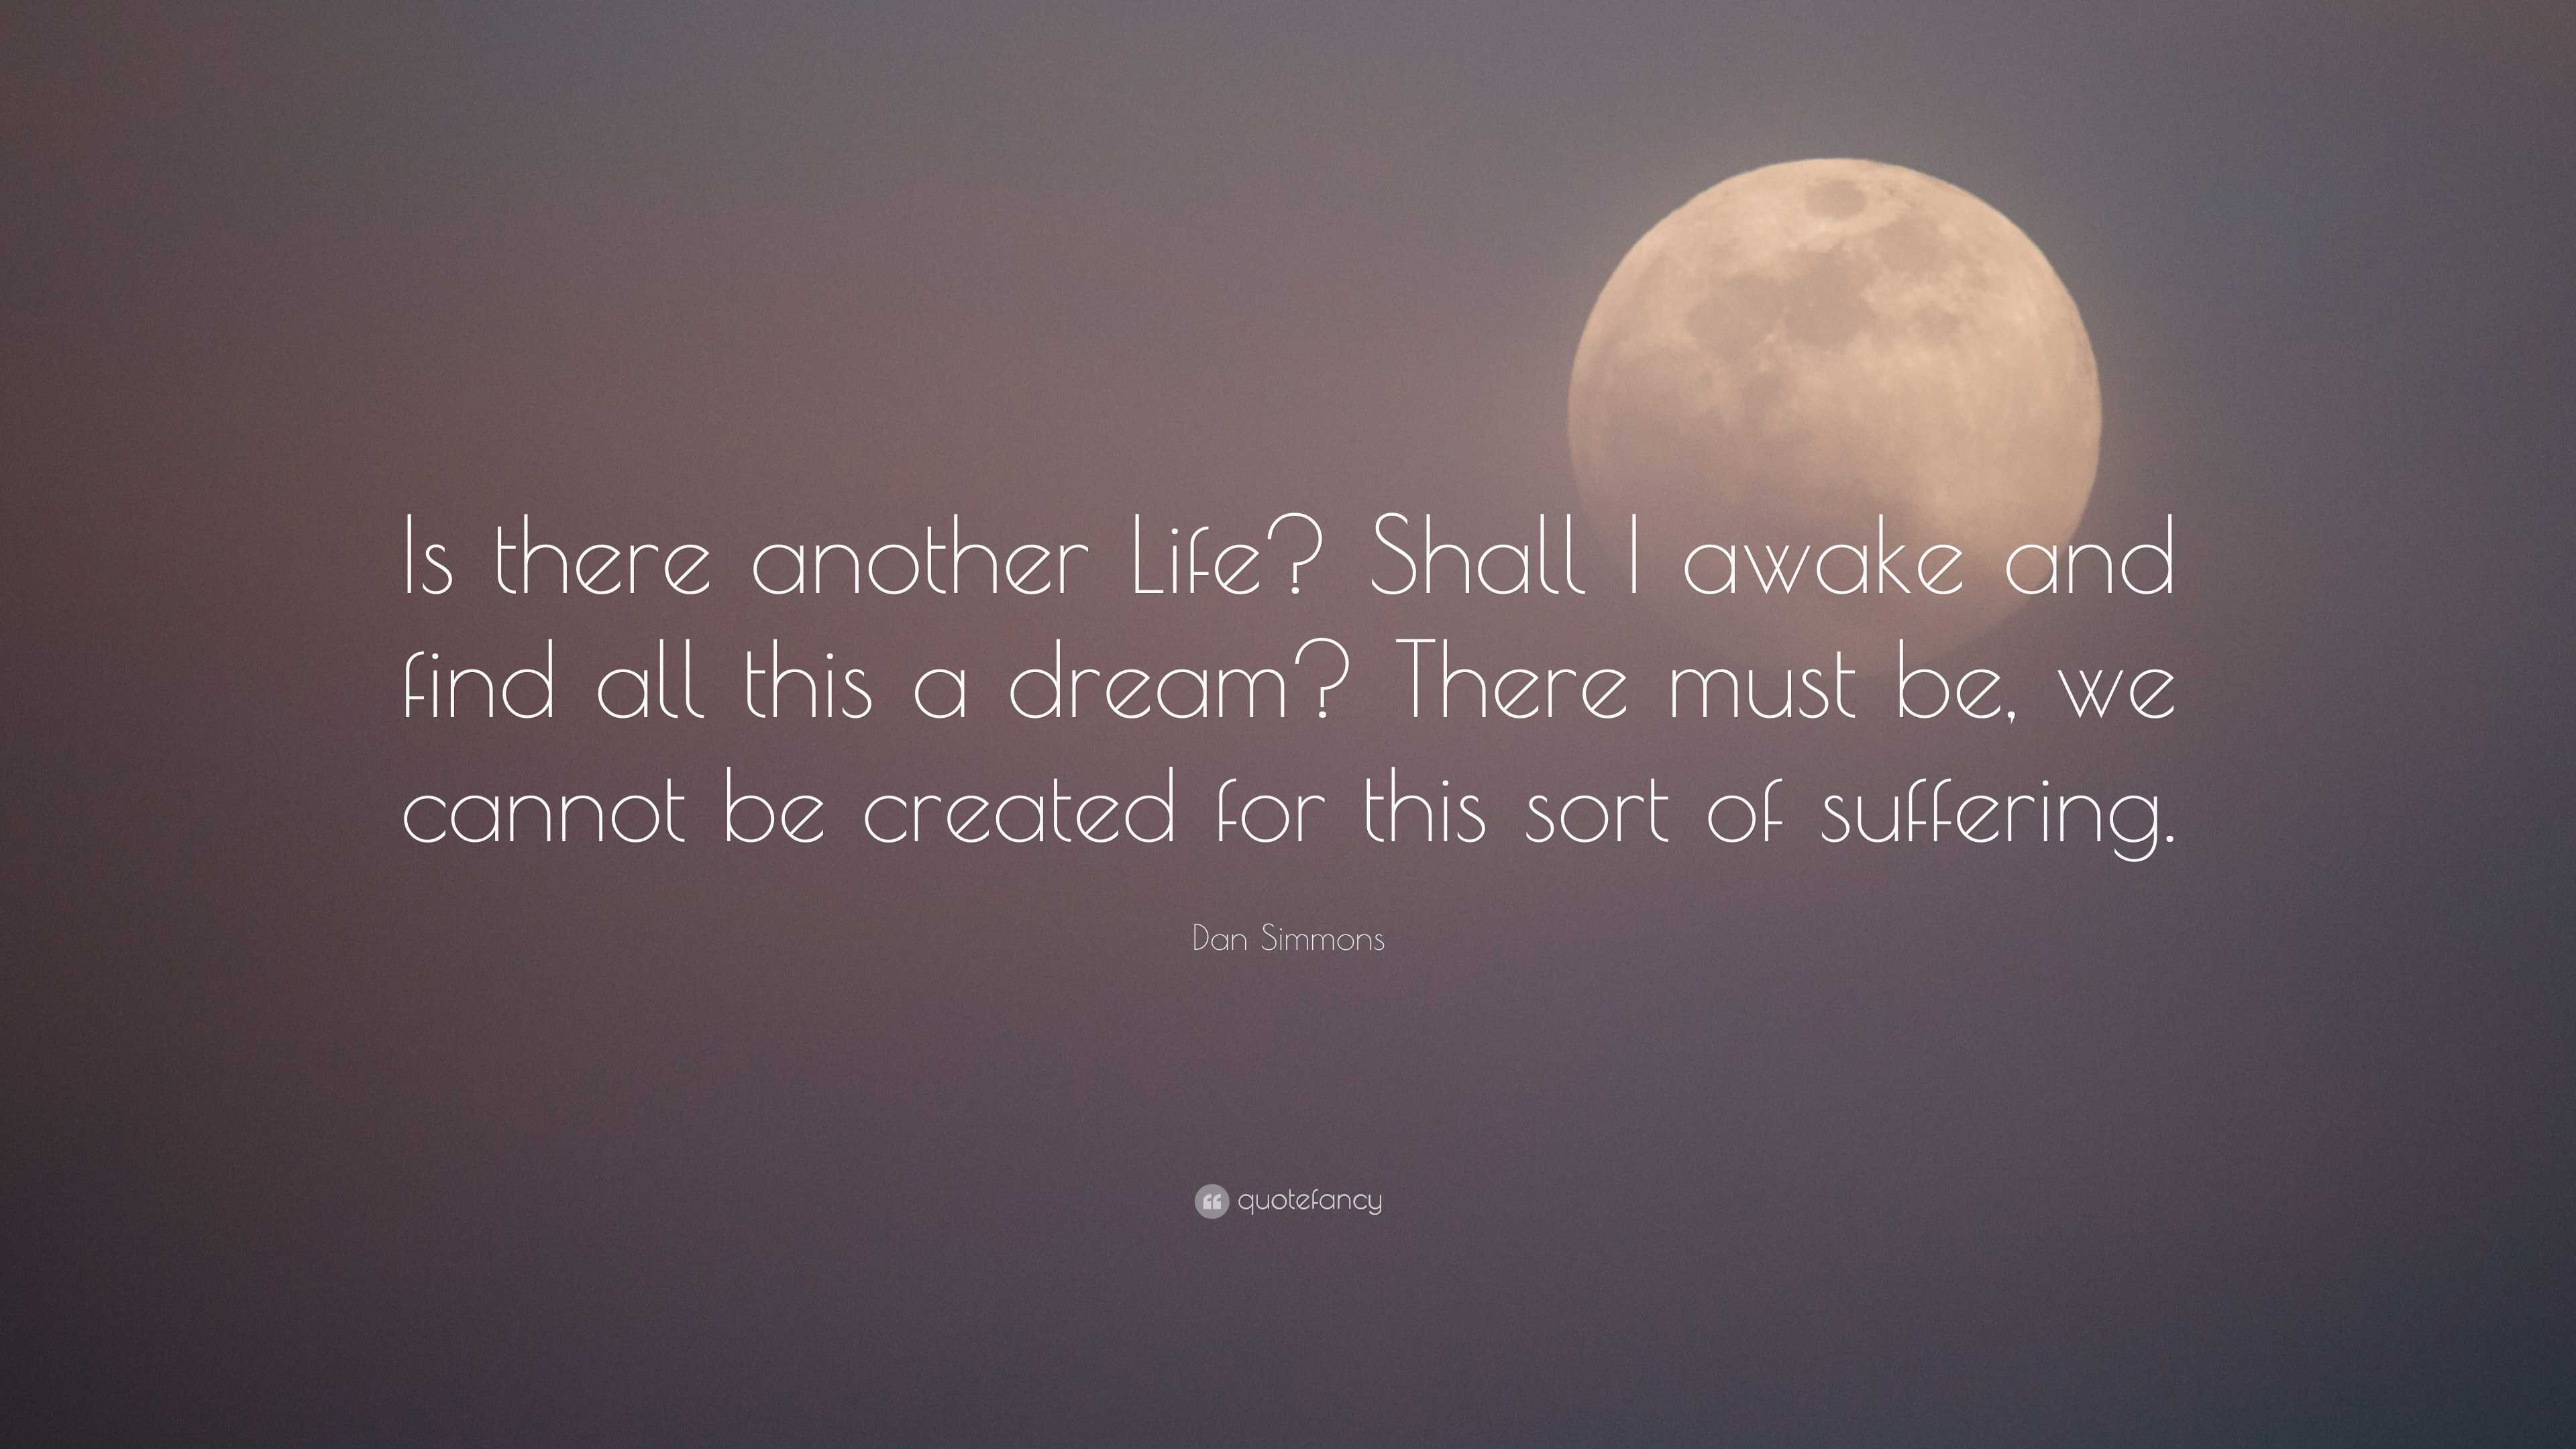 Dan Simmons Quote: “Is there another Life? Shall I awake and find all ...